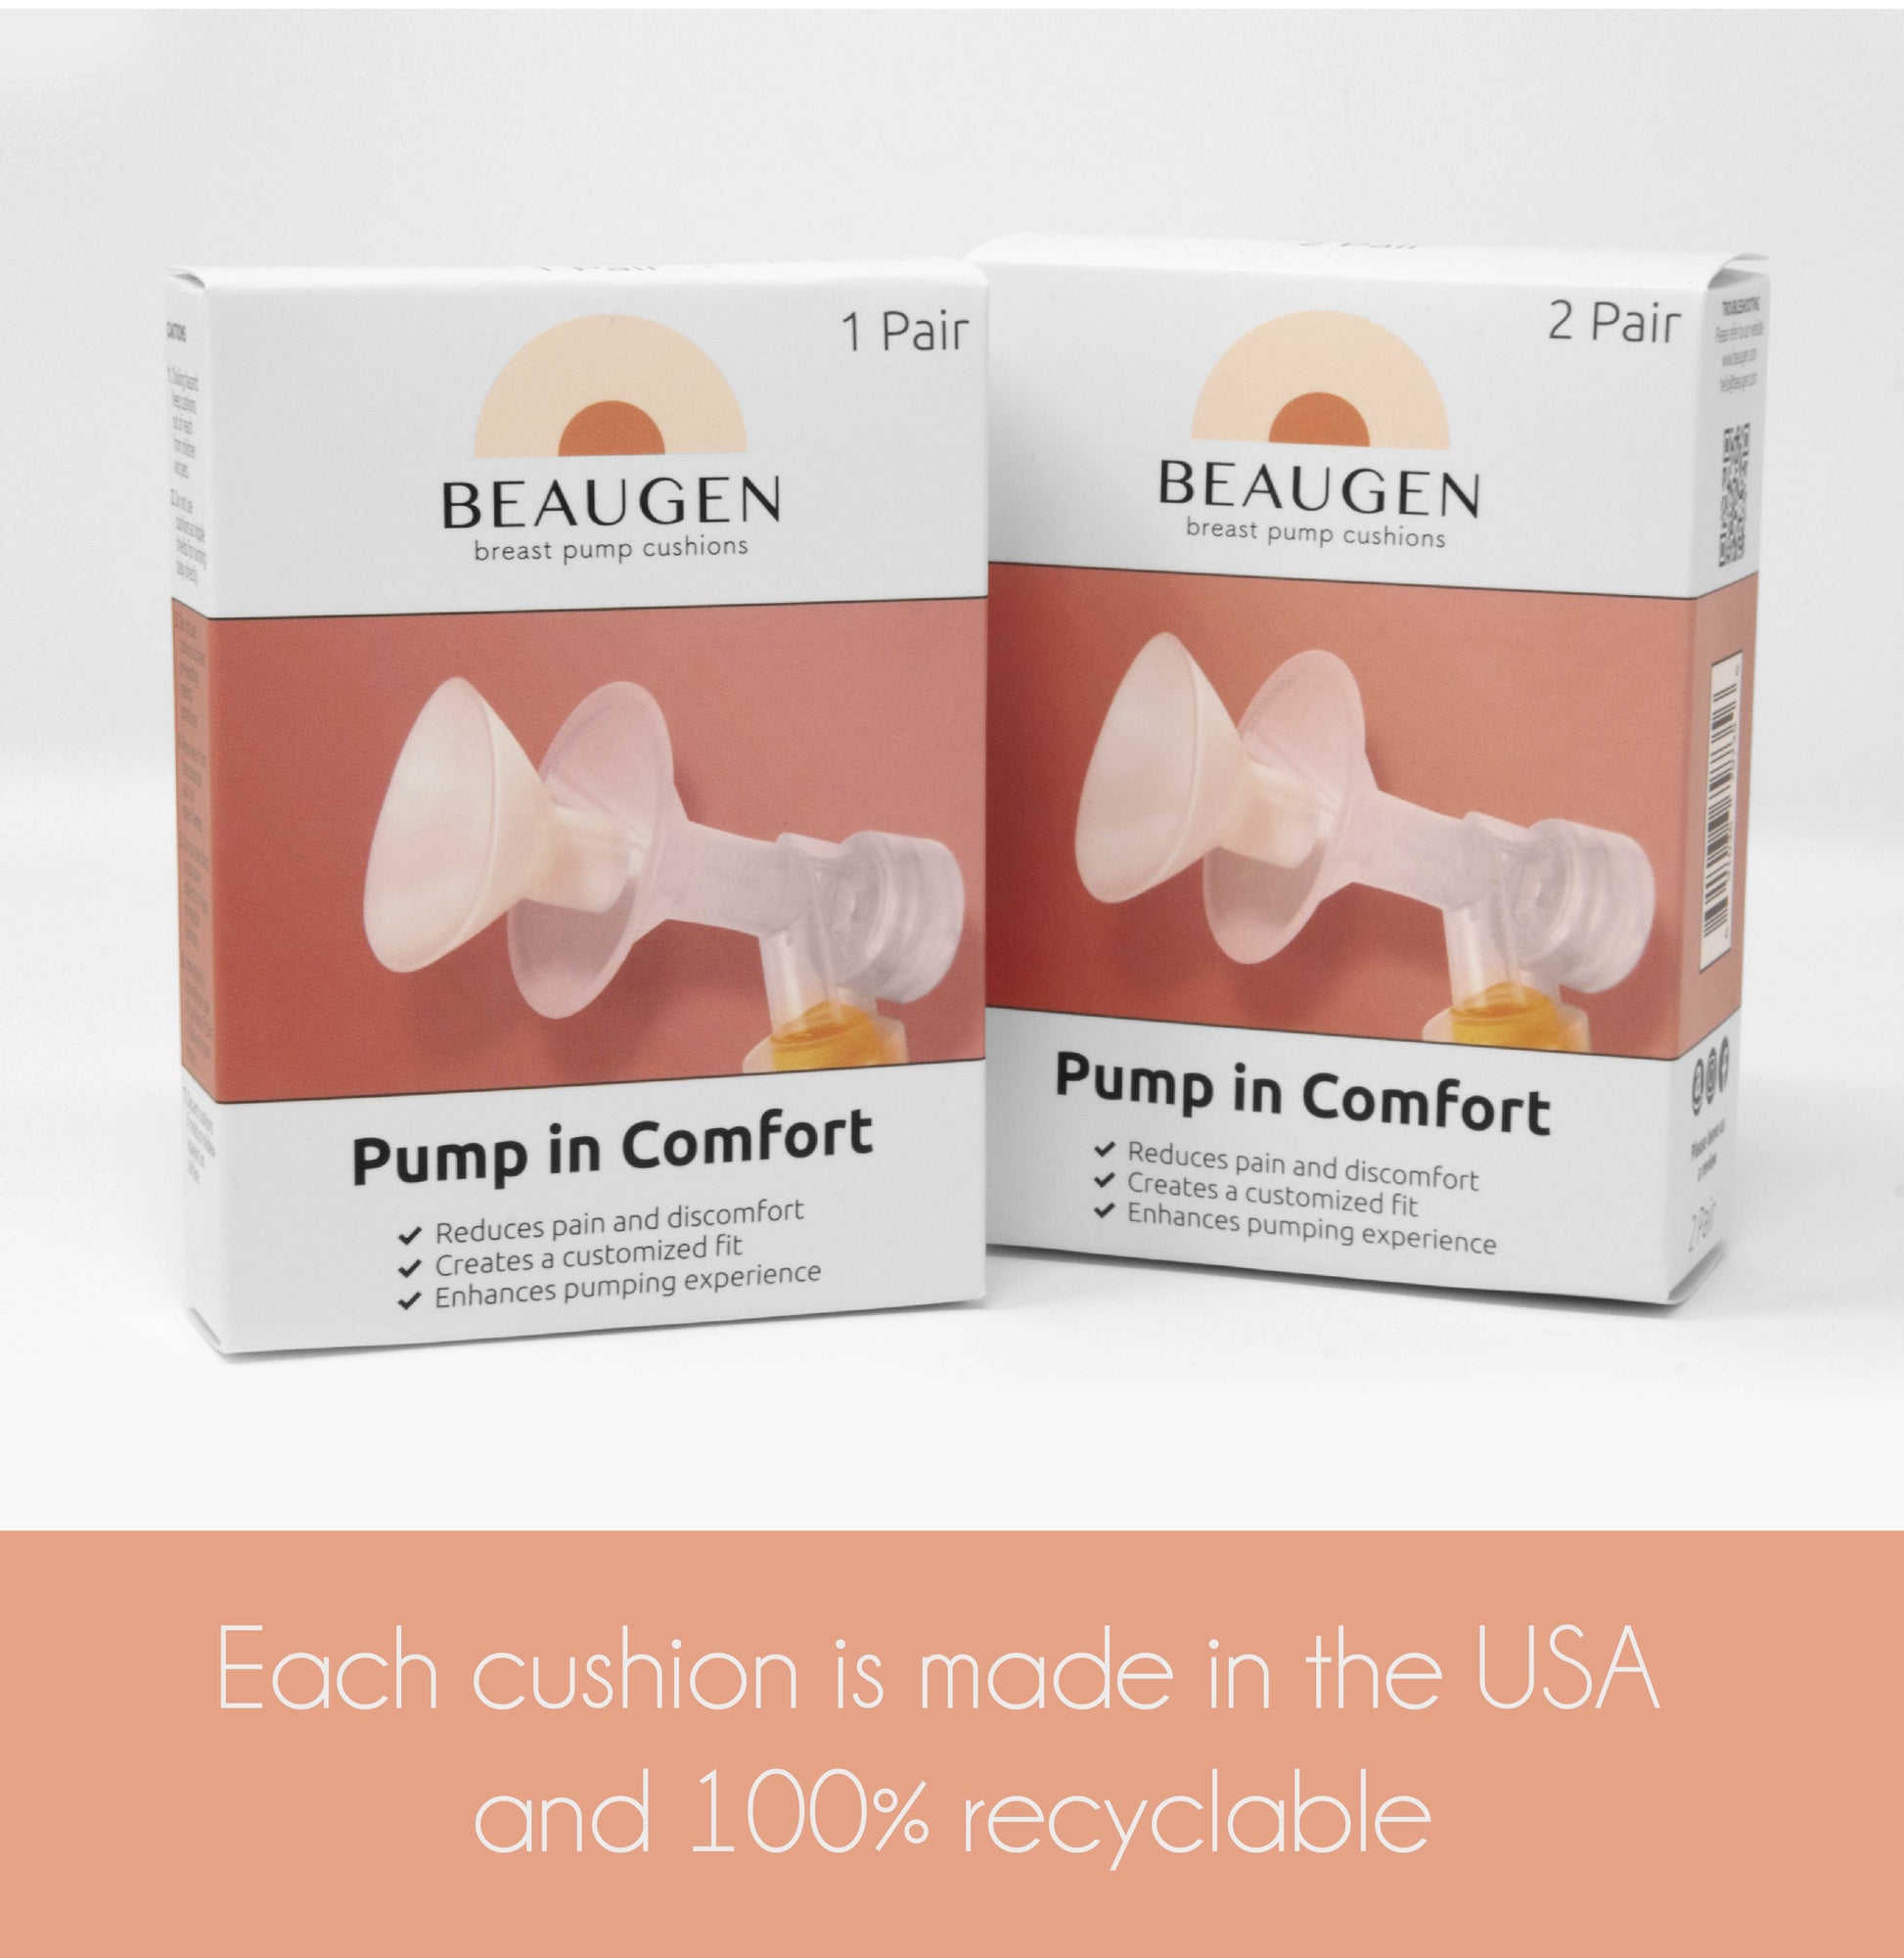 Pump in comfort, while saving time and money by purchasing two pair of BeauGen Breast Pump Cushions at a time. 